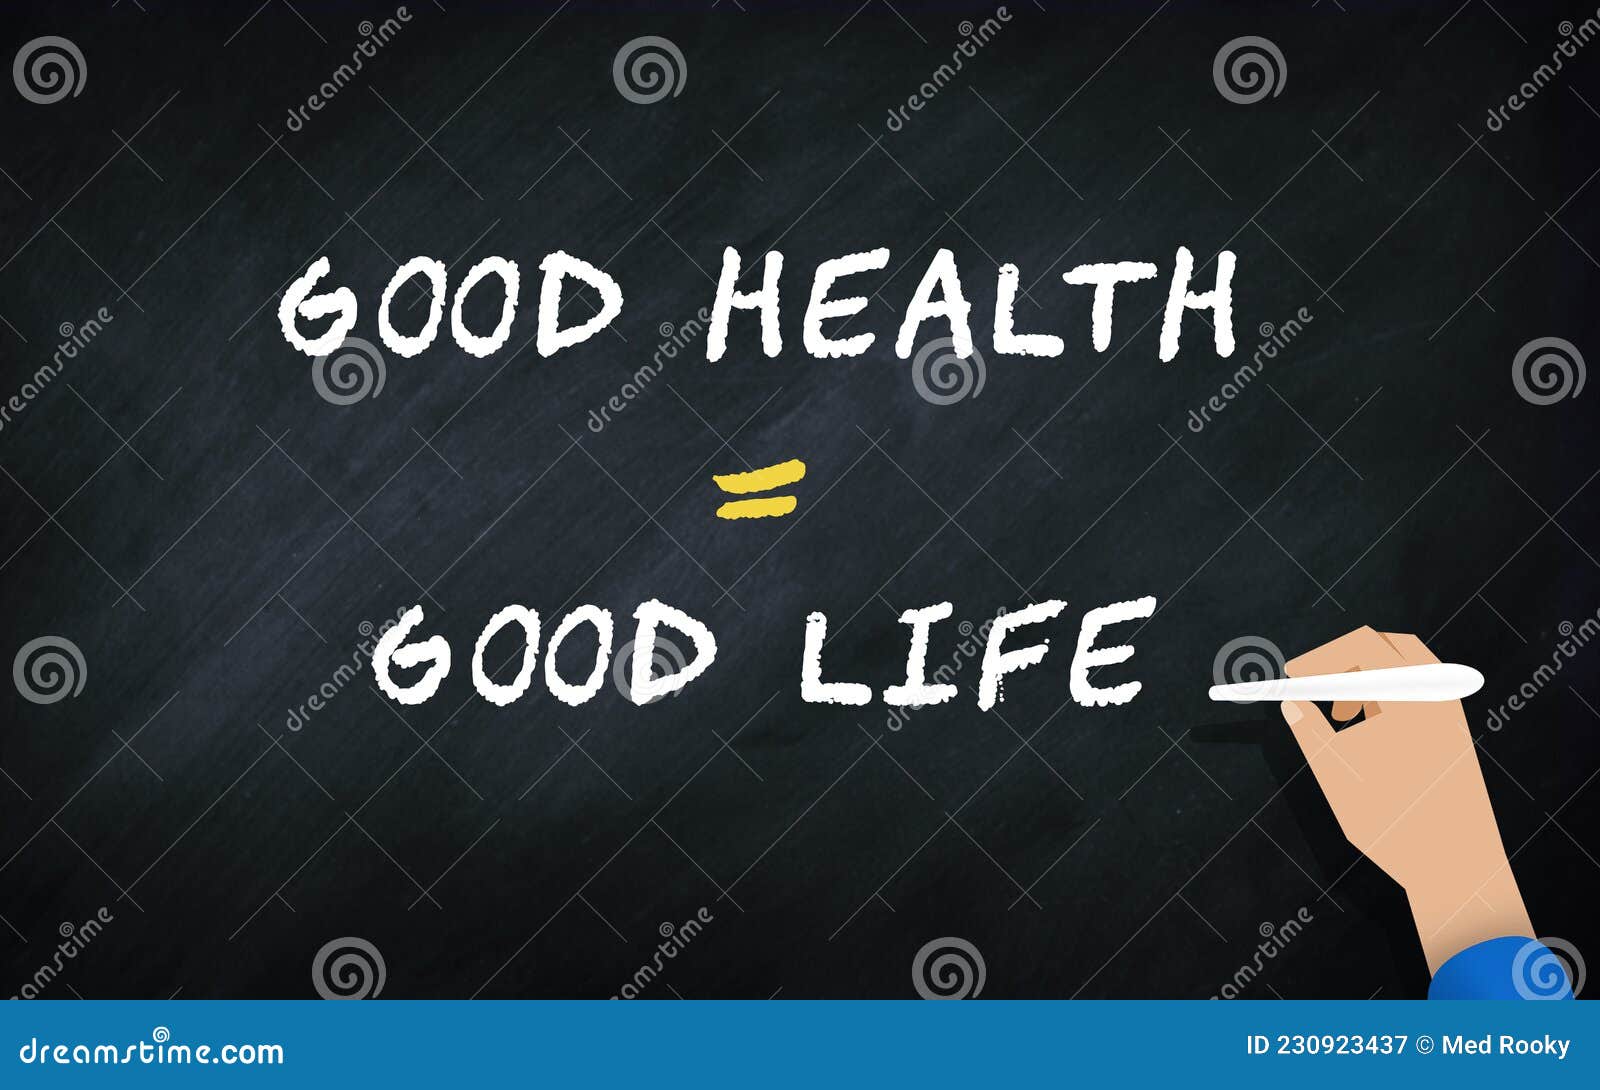 good greatly equal good life conceit on chalkboard with human hand writing text in blackboard . conceptual idea of health